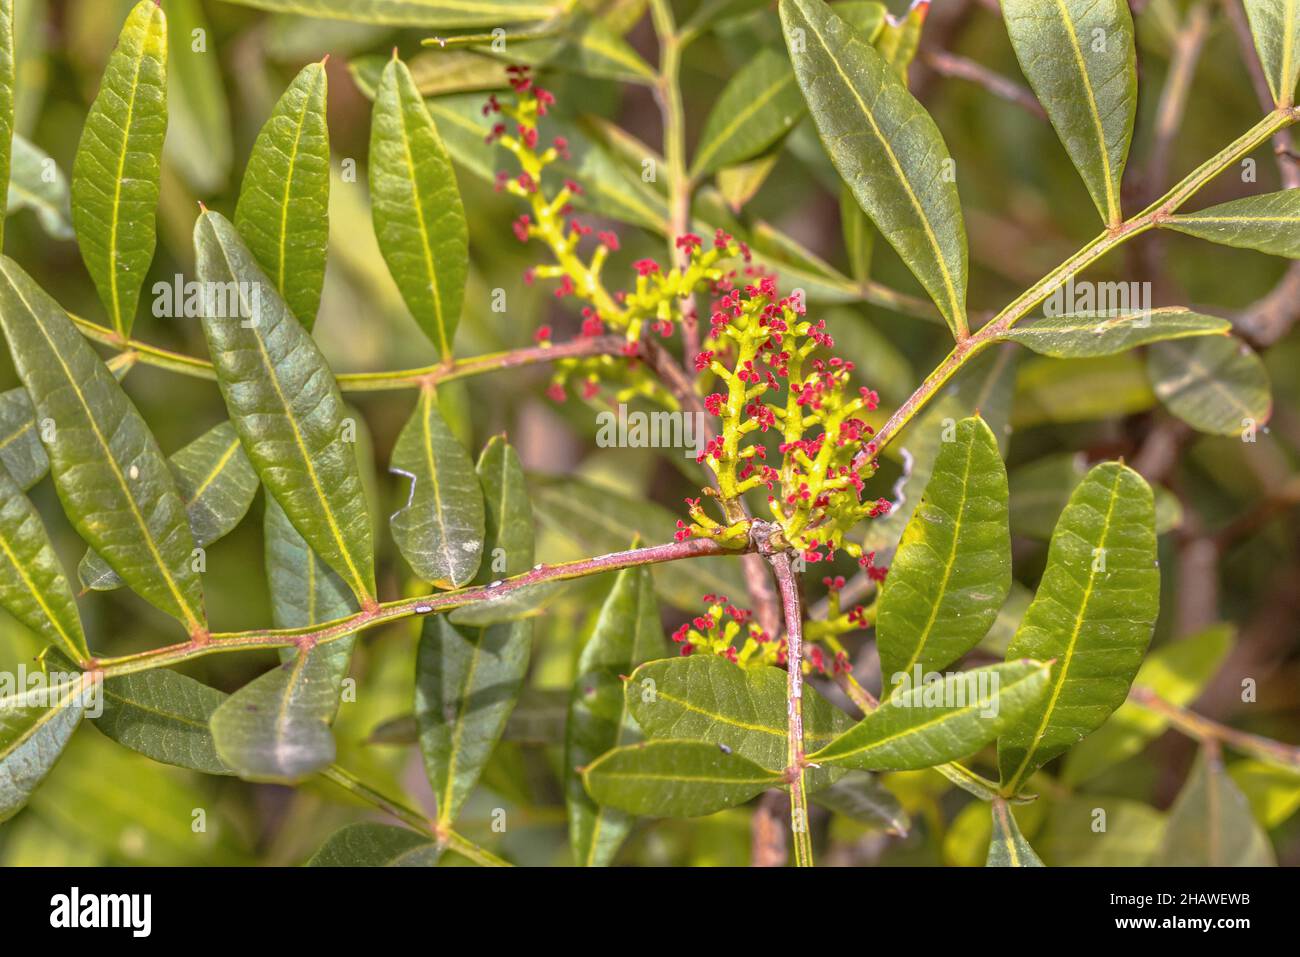 Mastic or Lentisk (Pistacia lentiscus) Tree blooming with red flowers. Extremadura, Spain. Nature Scene of Europe. Stock Photo